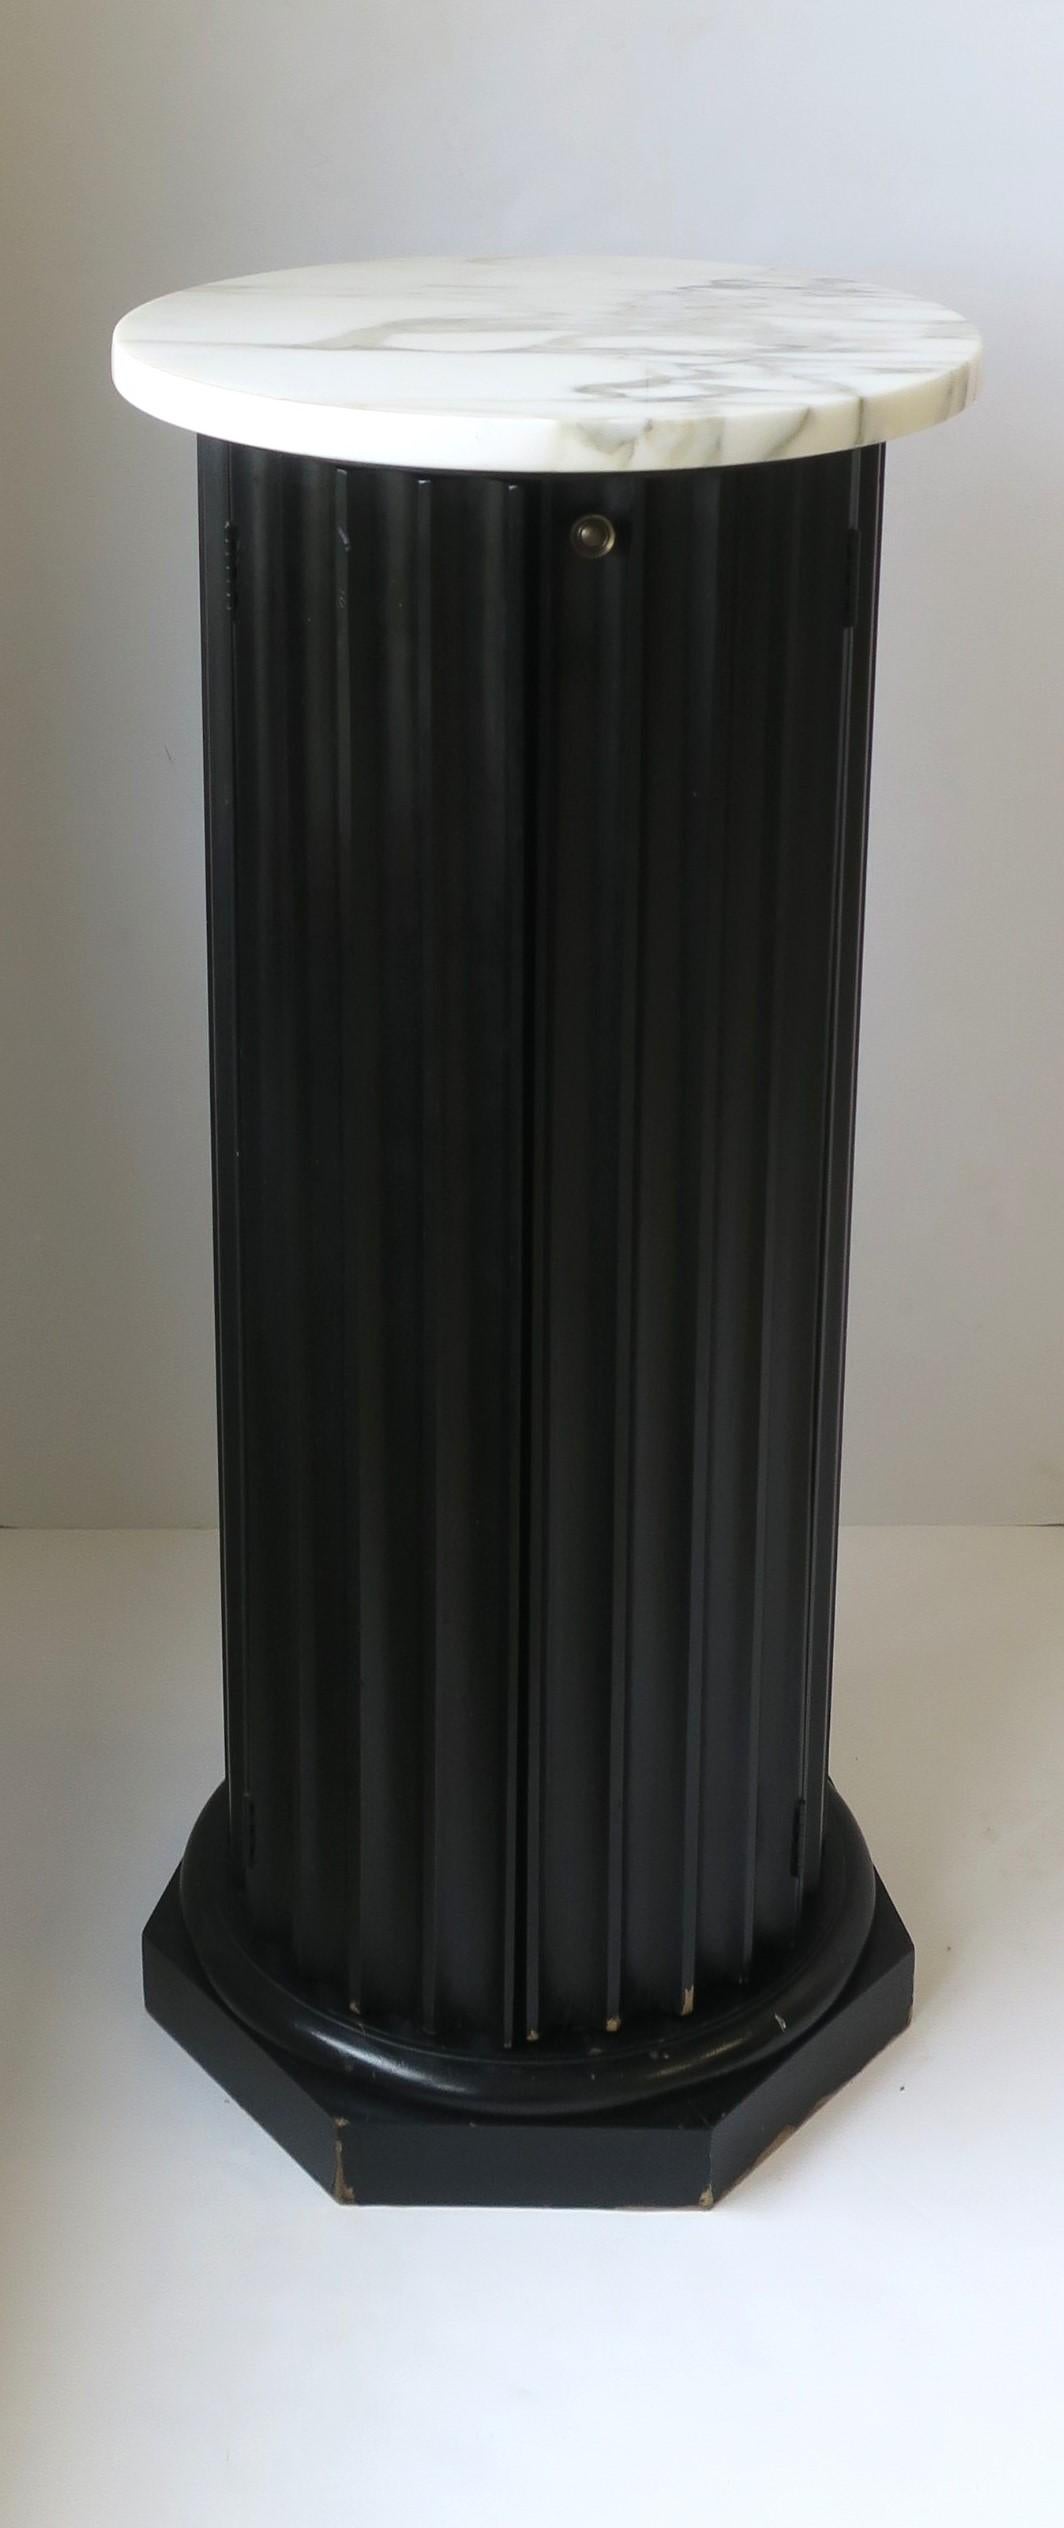 **There are two pedestals available, each sold separately, as per listing. 

A beautiful black fluted wood and white marble top pillar column pedestal stand in the Neoclassical design style, circa mid to late-20th century. Fluted wood pedestal is